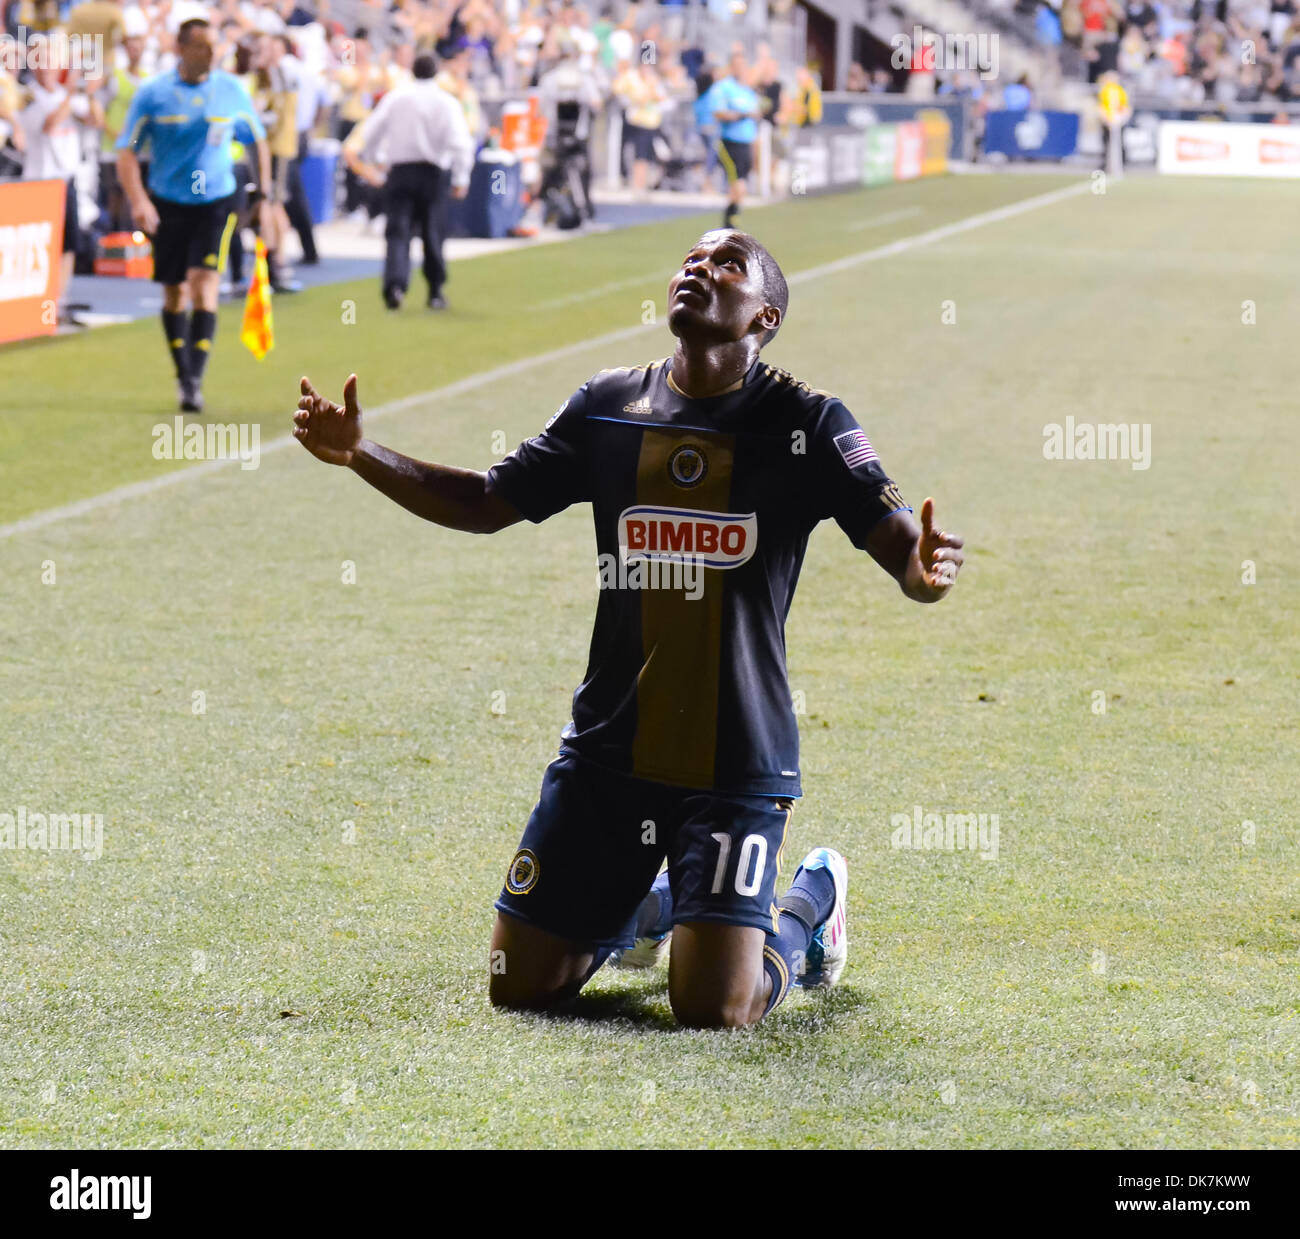 June 25, 2011 - Chester, PA, USA - Philadelphia Union FW, DANNY MWANGA, looks to the heavens in celebration after scoring the winning goal for the Union. The Union played Chivas USA at PPL Park in Chester Pa. The Union won the match 3-2. (Credit Image: © Ricky Fitchett/ZUMAPRESS.com) Stock Photo